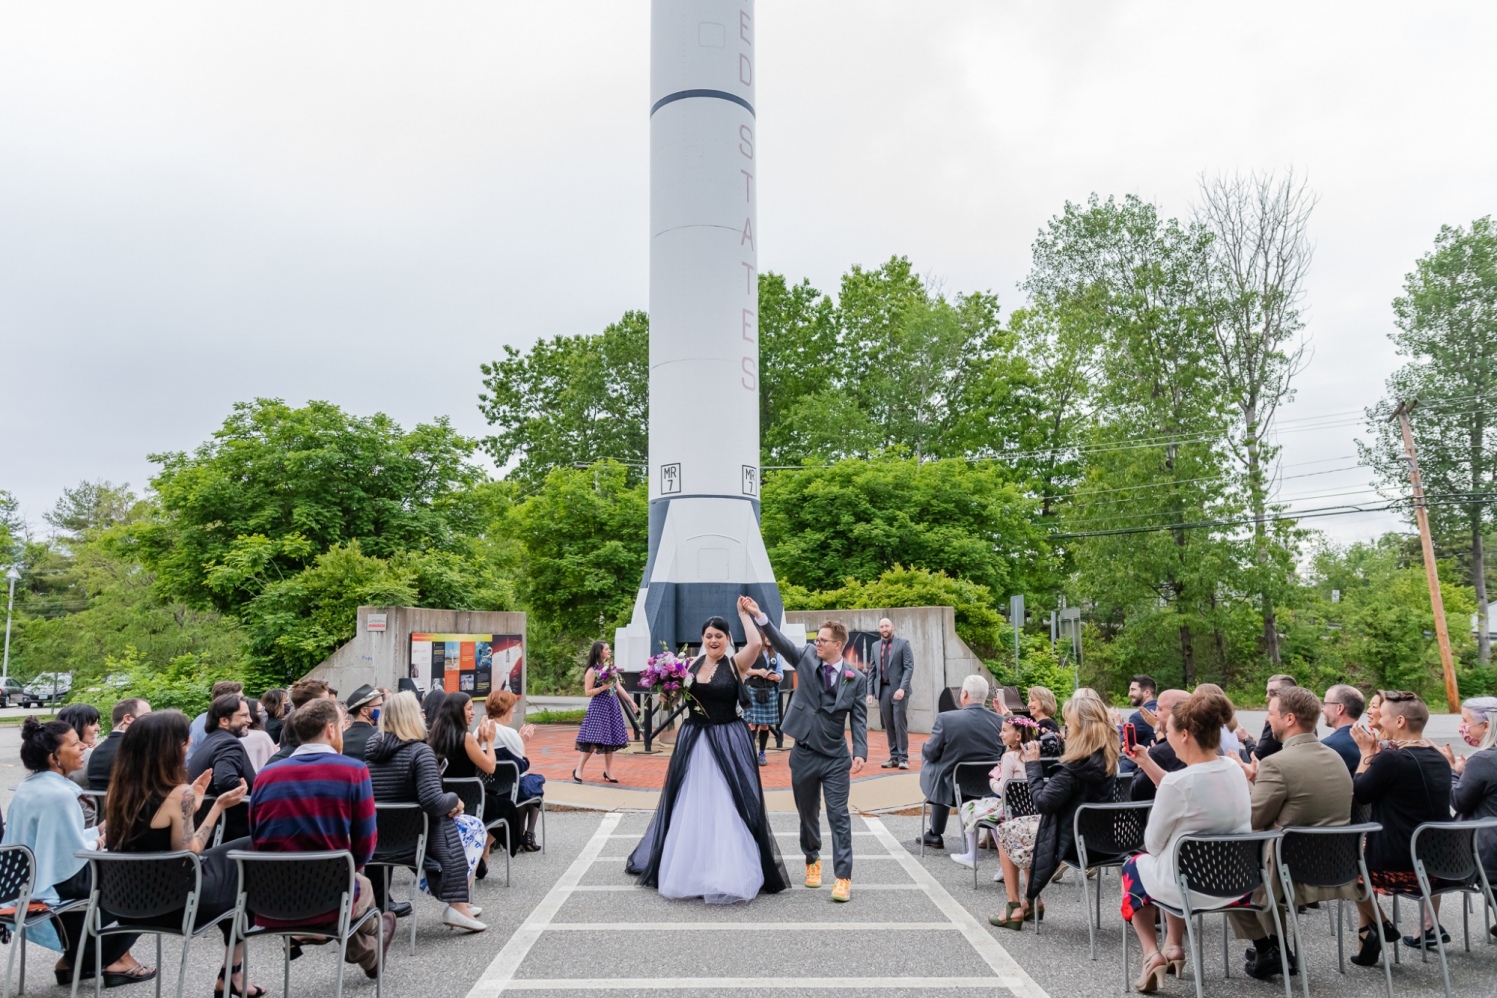 Unique wedding at McAuliffe-Shepard Discovery Center in Concord, NH